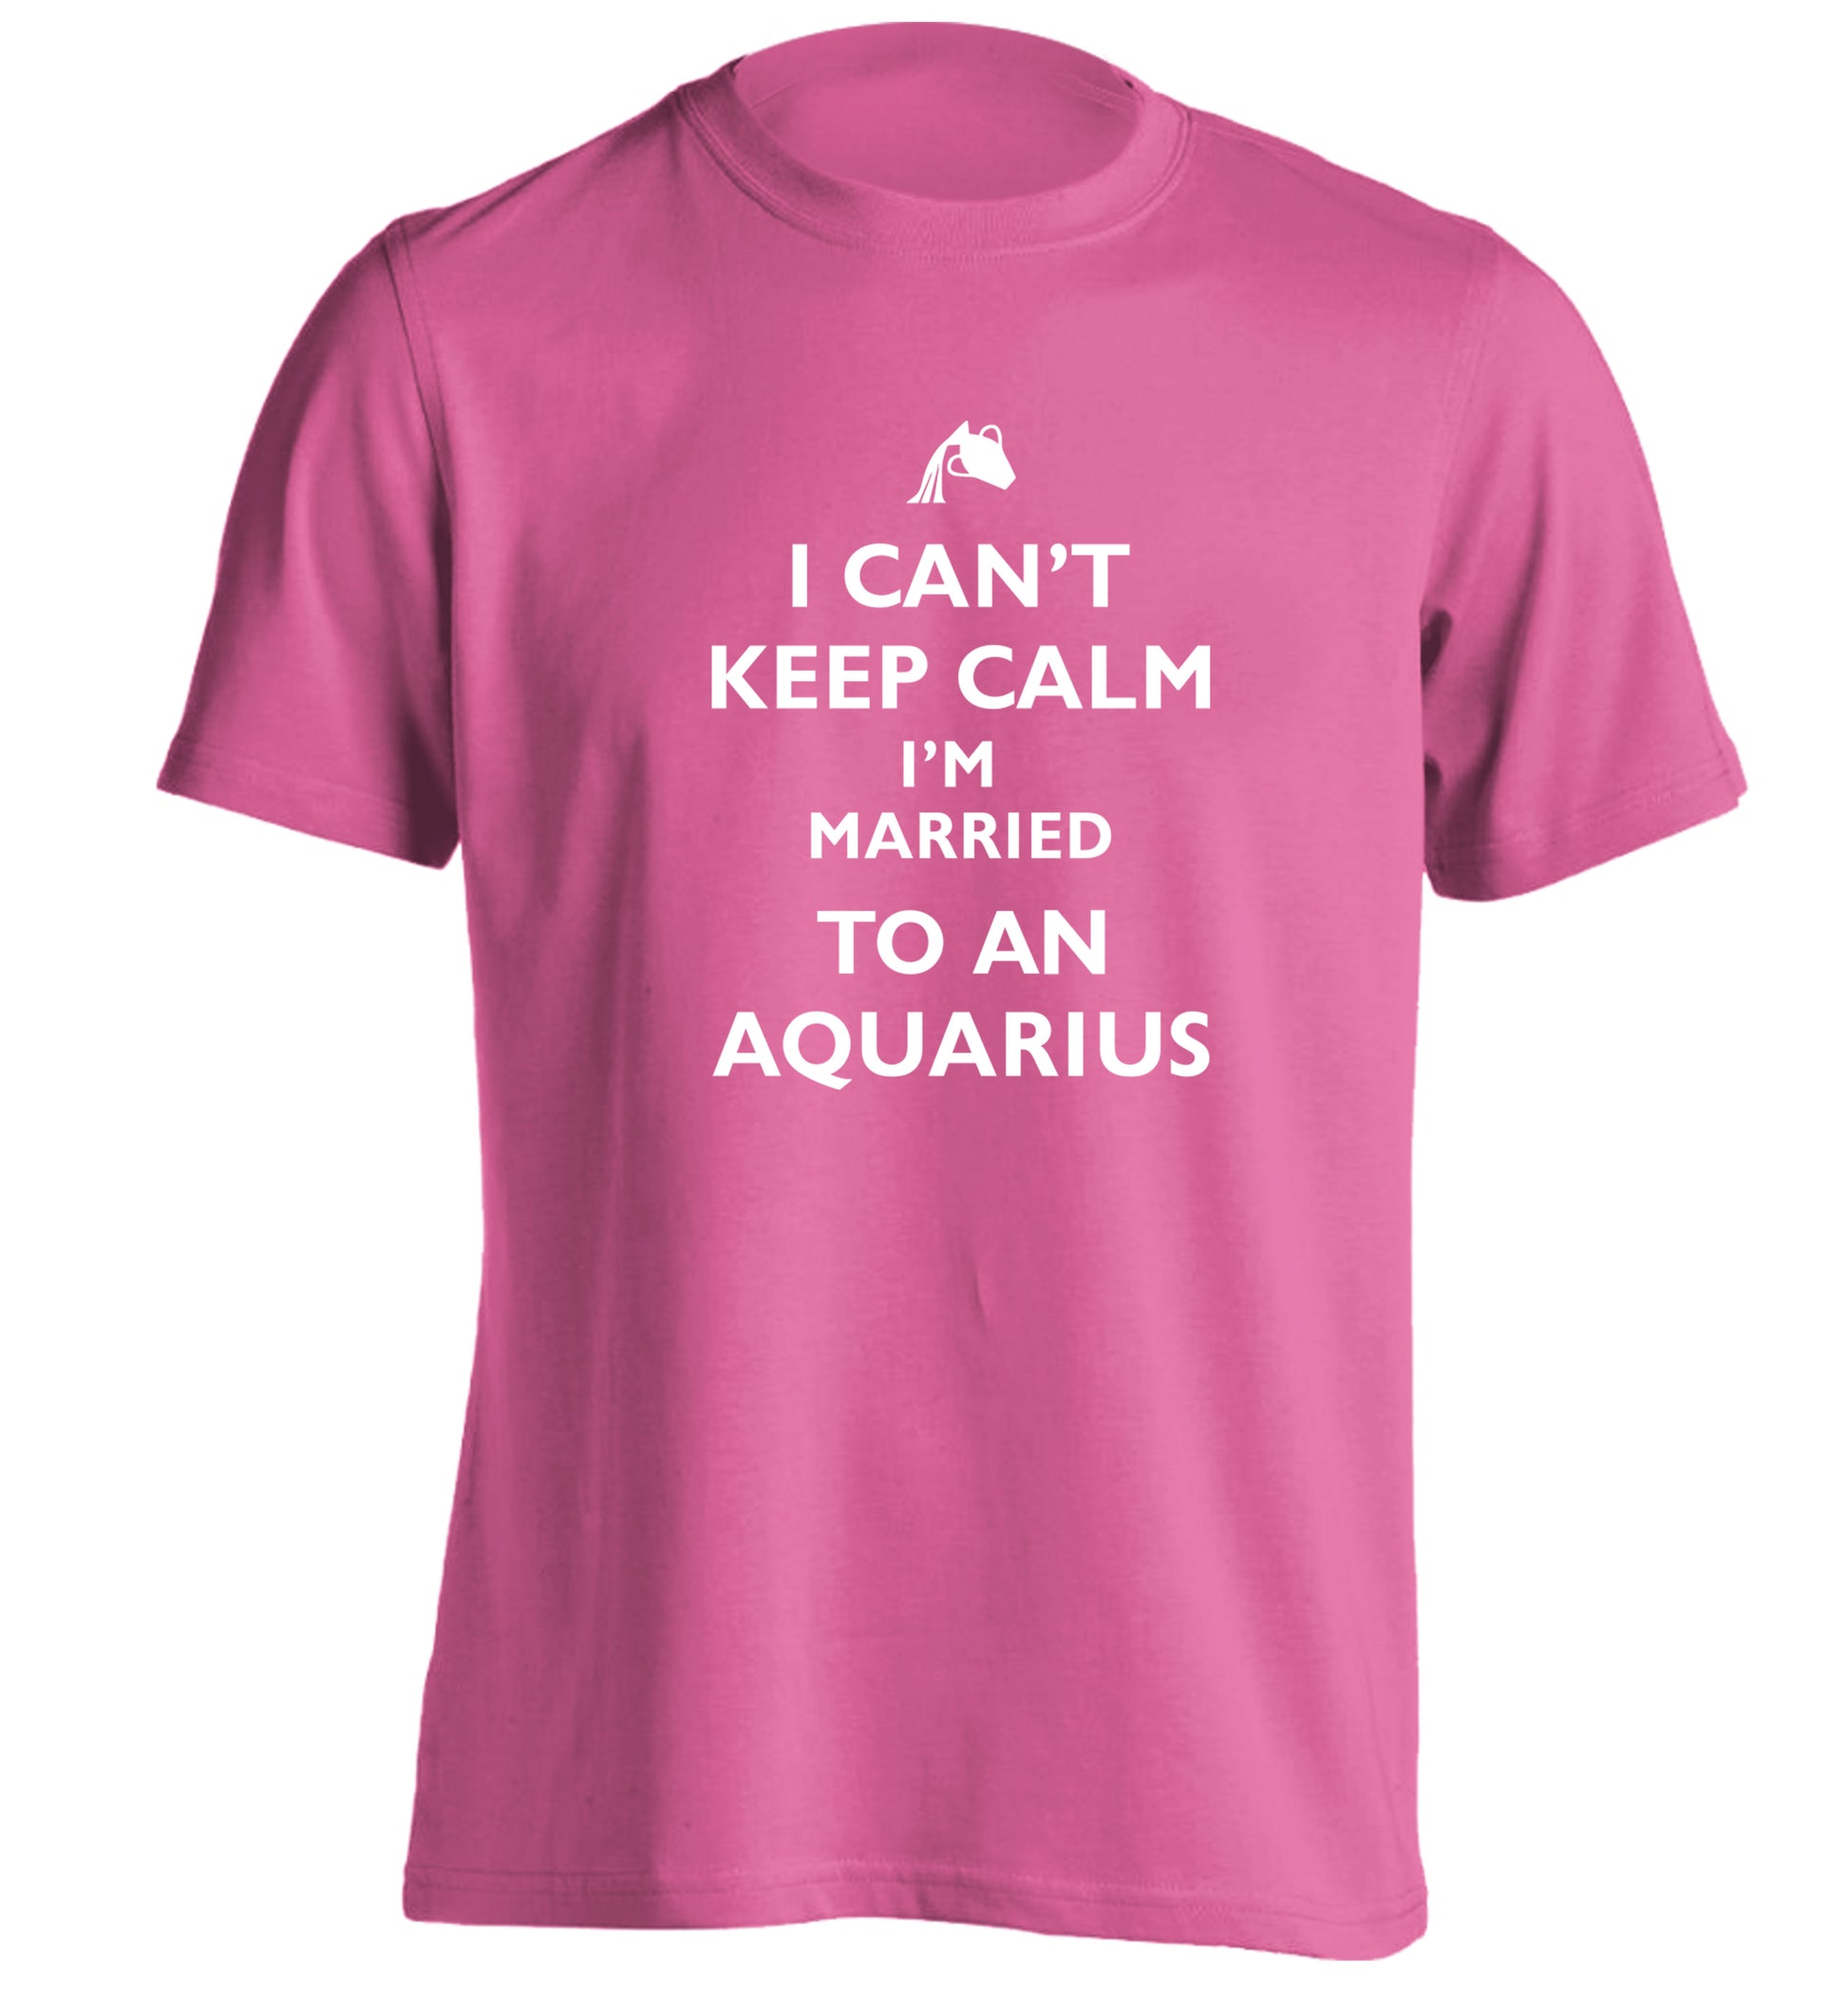 I can't keep calm I'm married to an aquarius adults unisex pink Tshirt 2XL